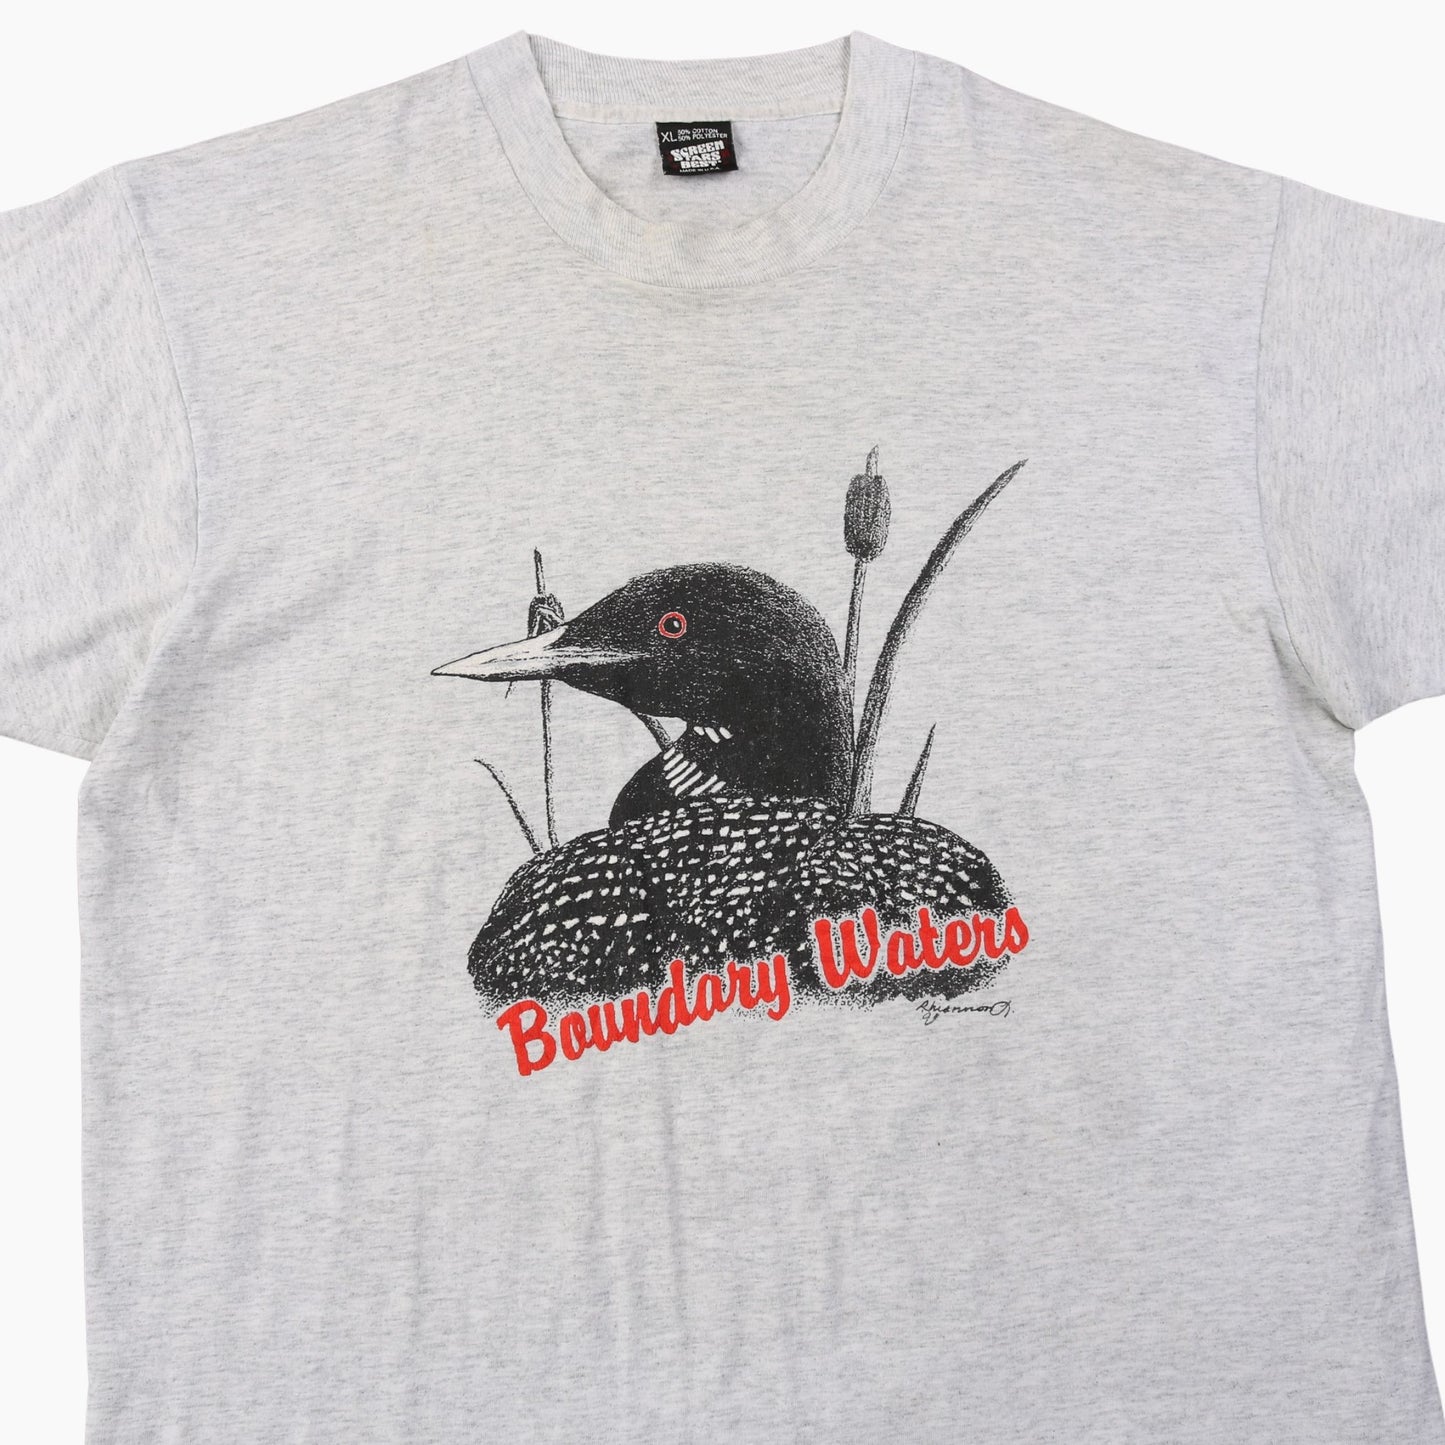 'Boundary Waters' T-Shirt - American Madness